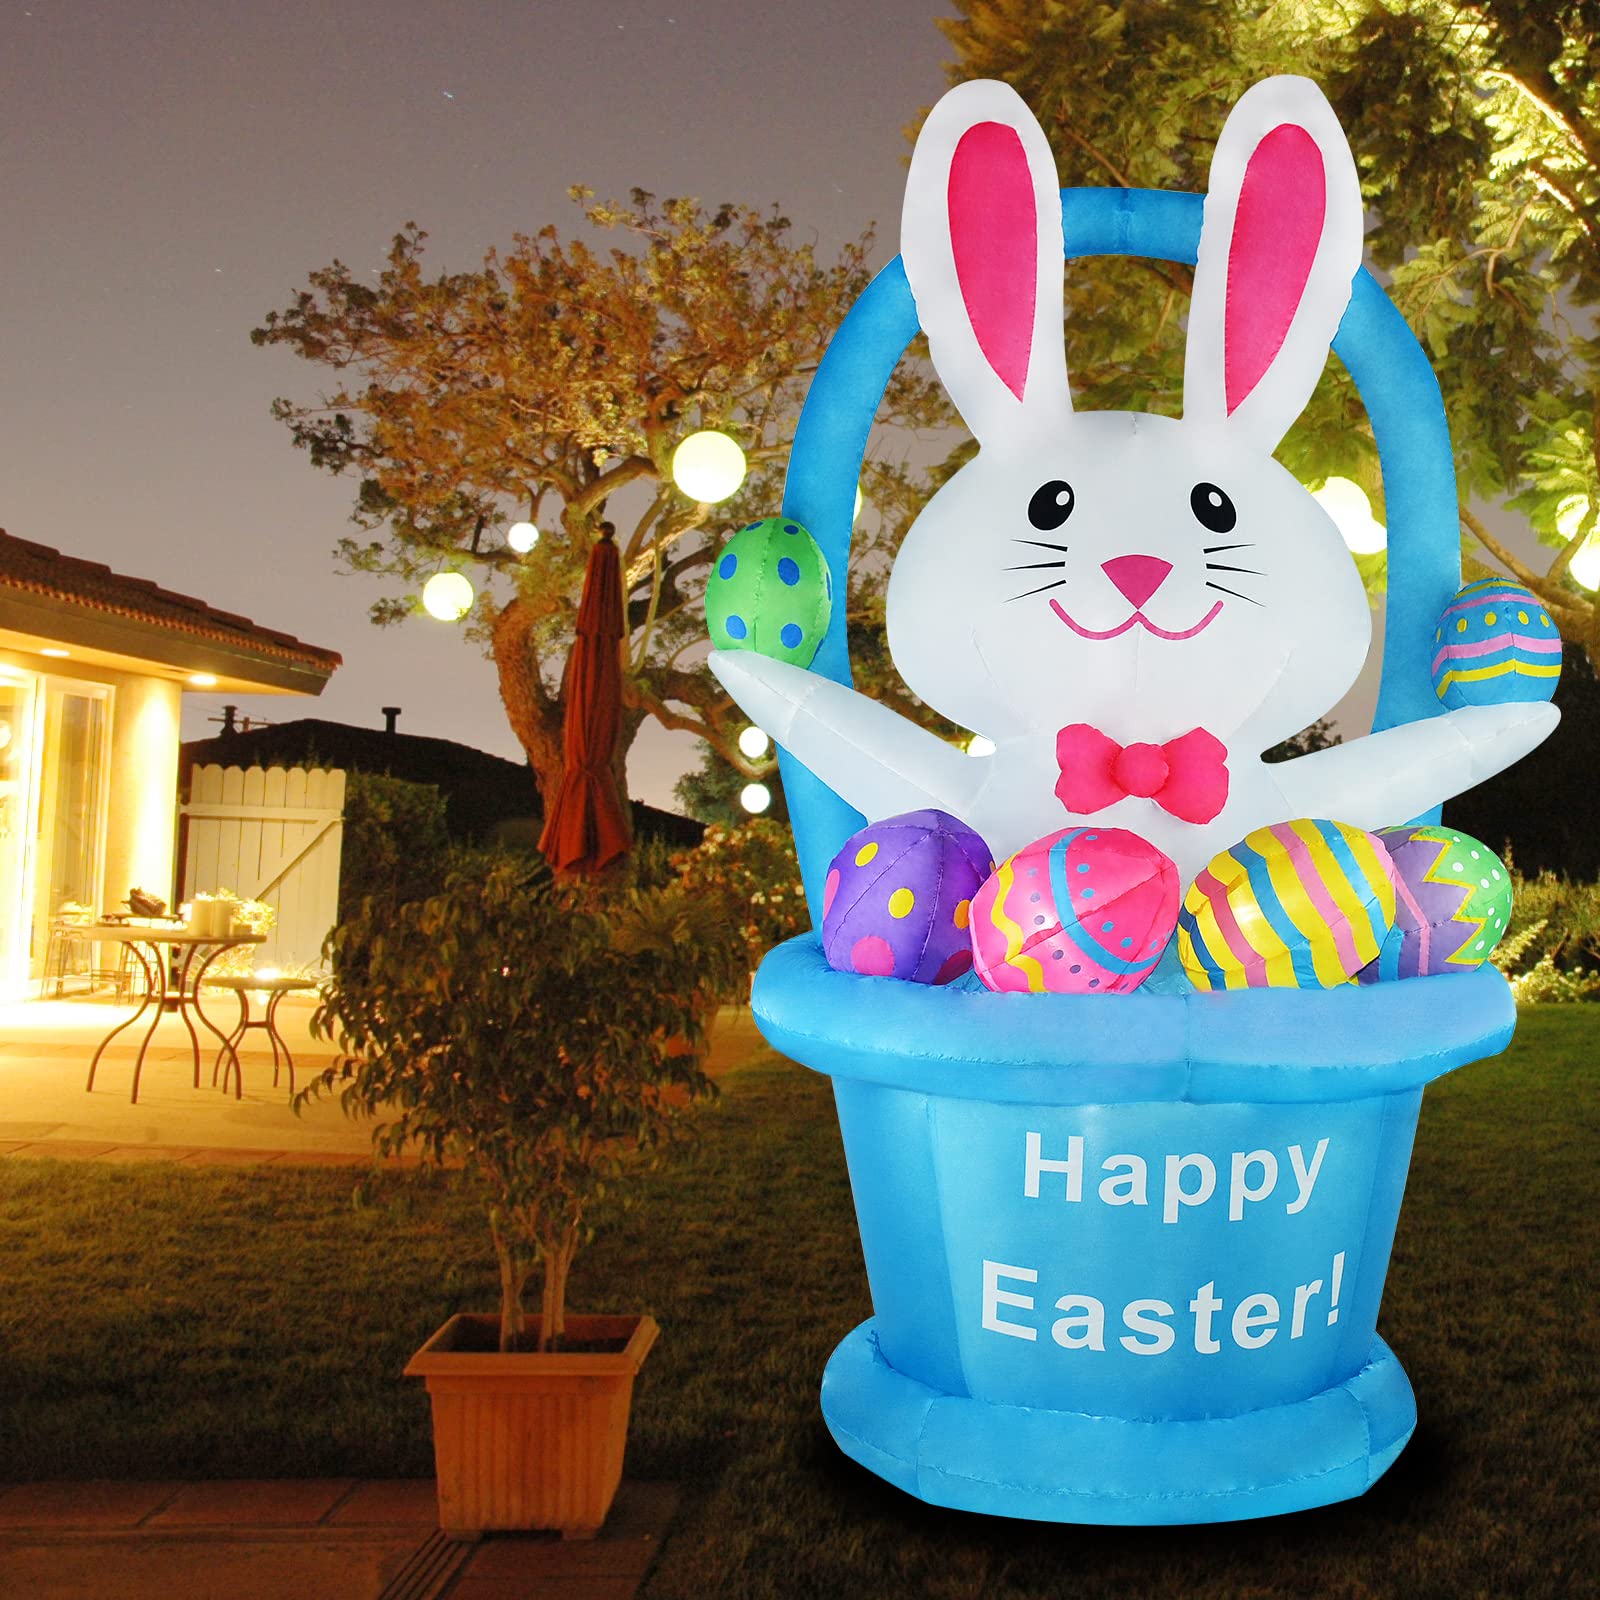 ZXSWONLY 5FT Easter Inflatables Outdoor Decorations Bunny with Basket & Colorful Eggs, Easter Blow Up Yard Decorations with LED Lights Built-in for Party Indoor, Outside, Garden, Lawn